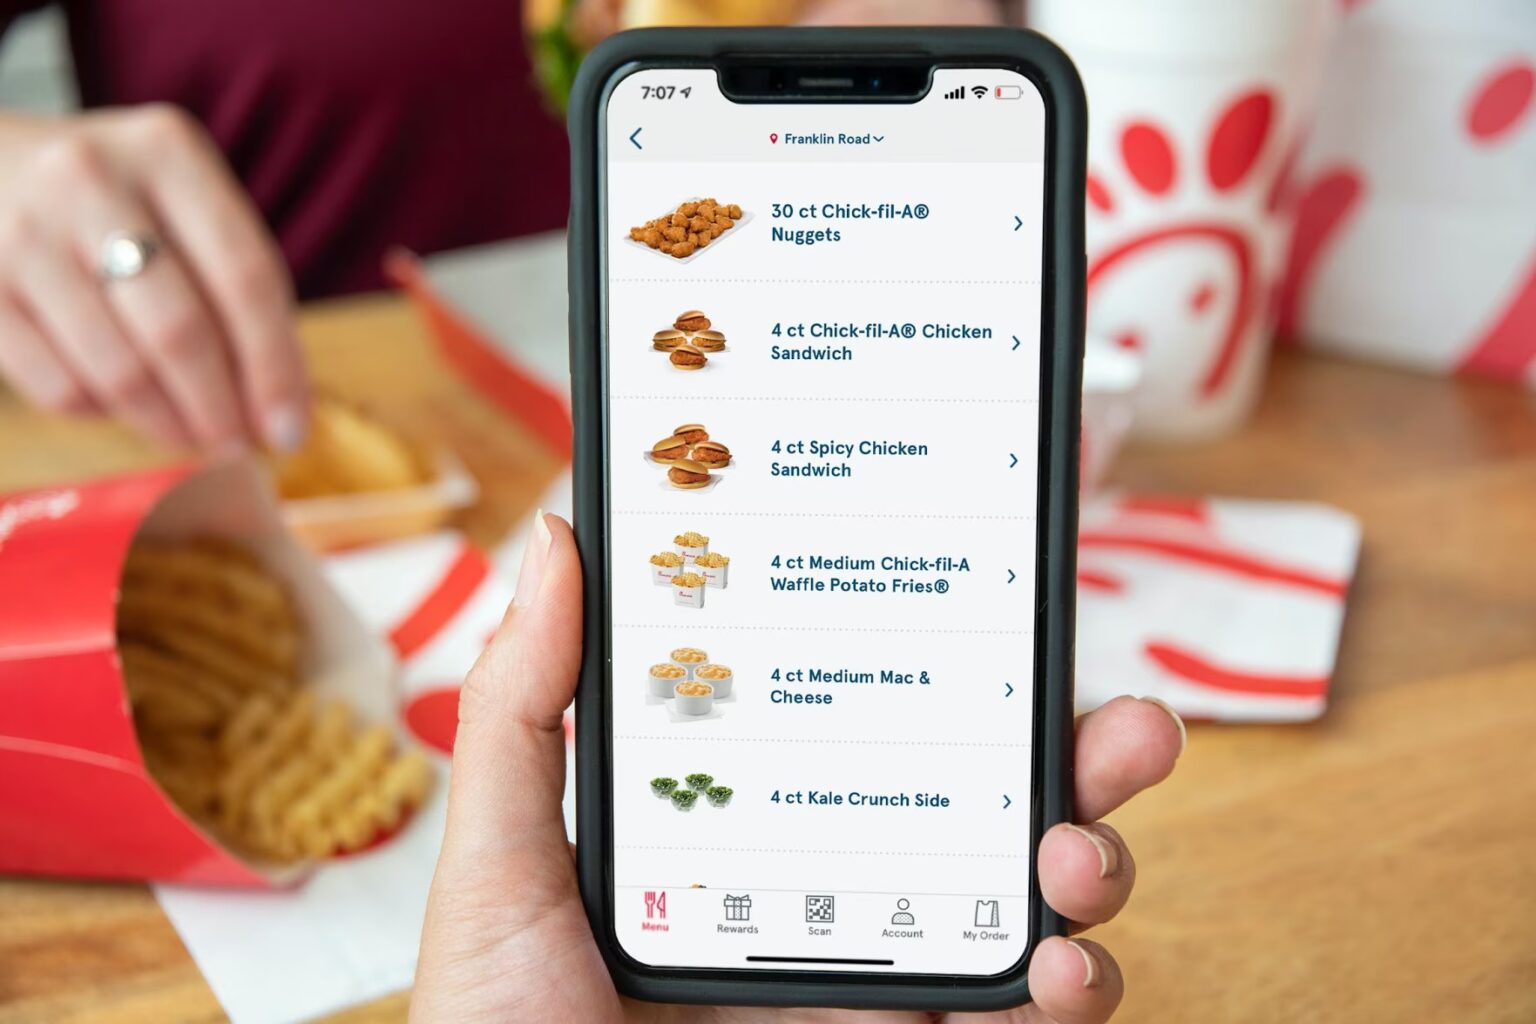 40+ Best Fast Food Apps With Free Food (Find Restaurant Apps)